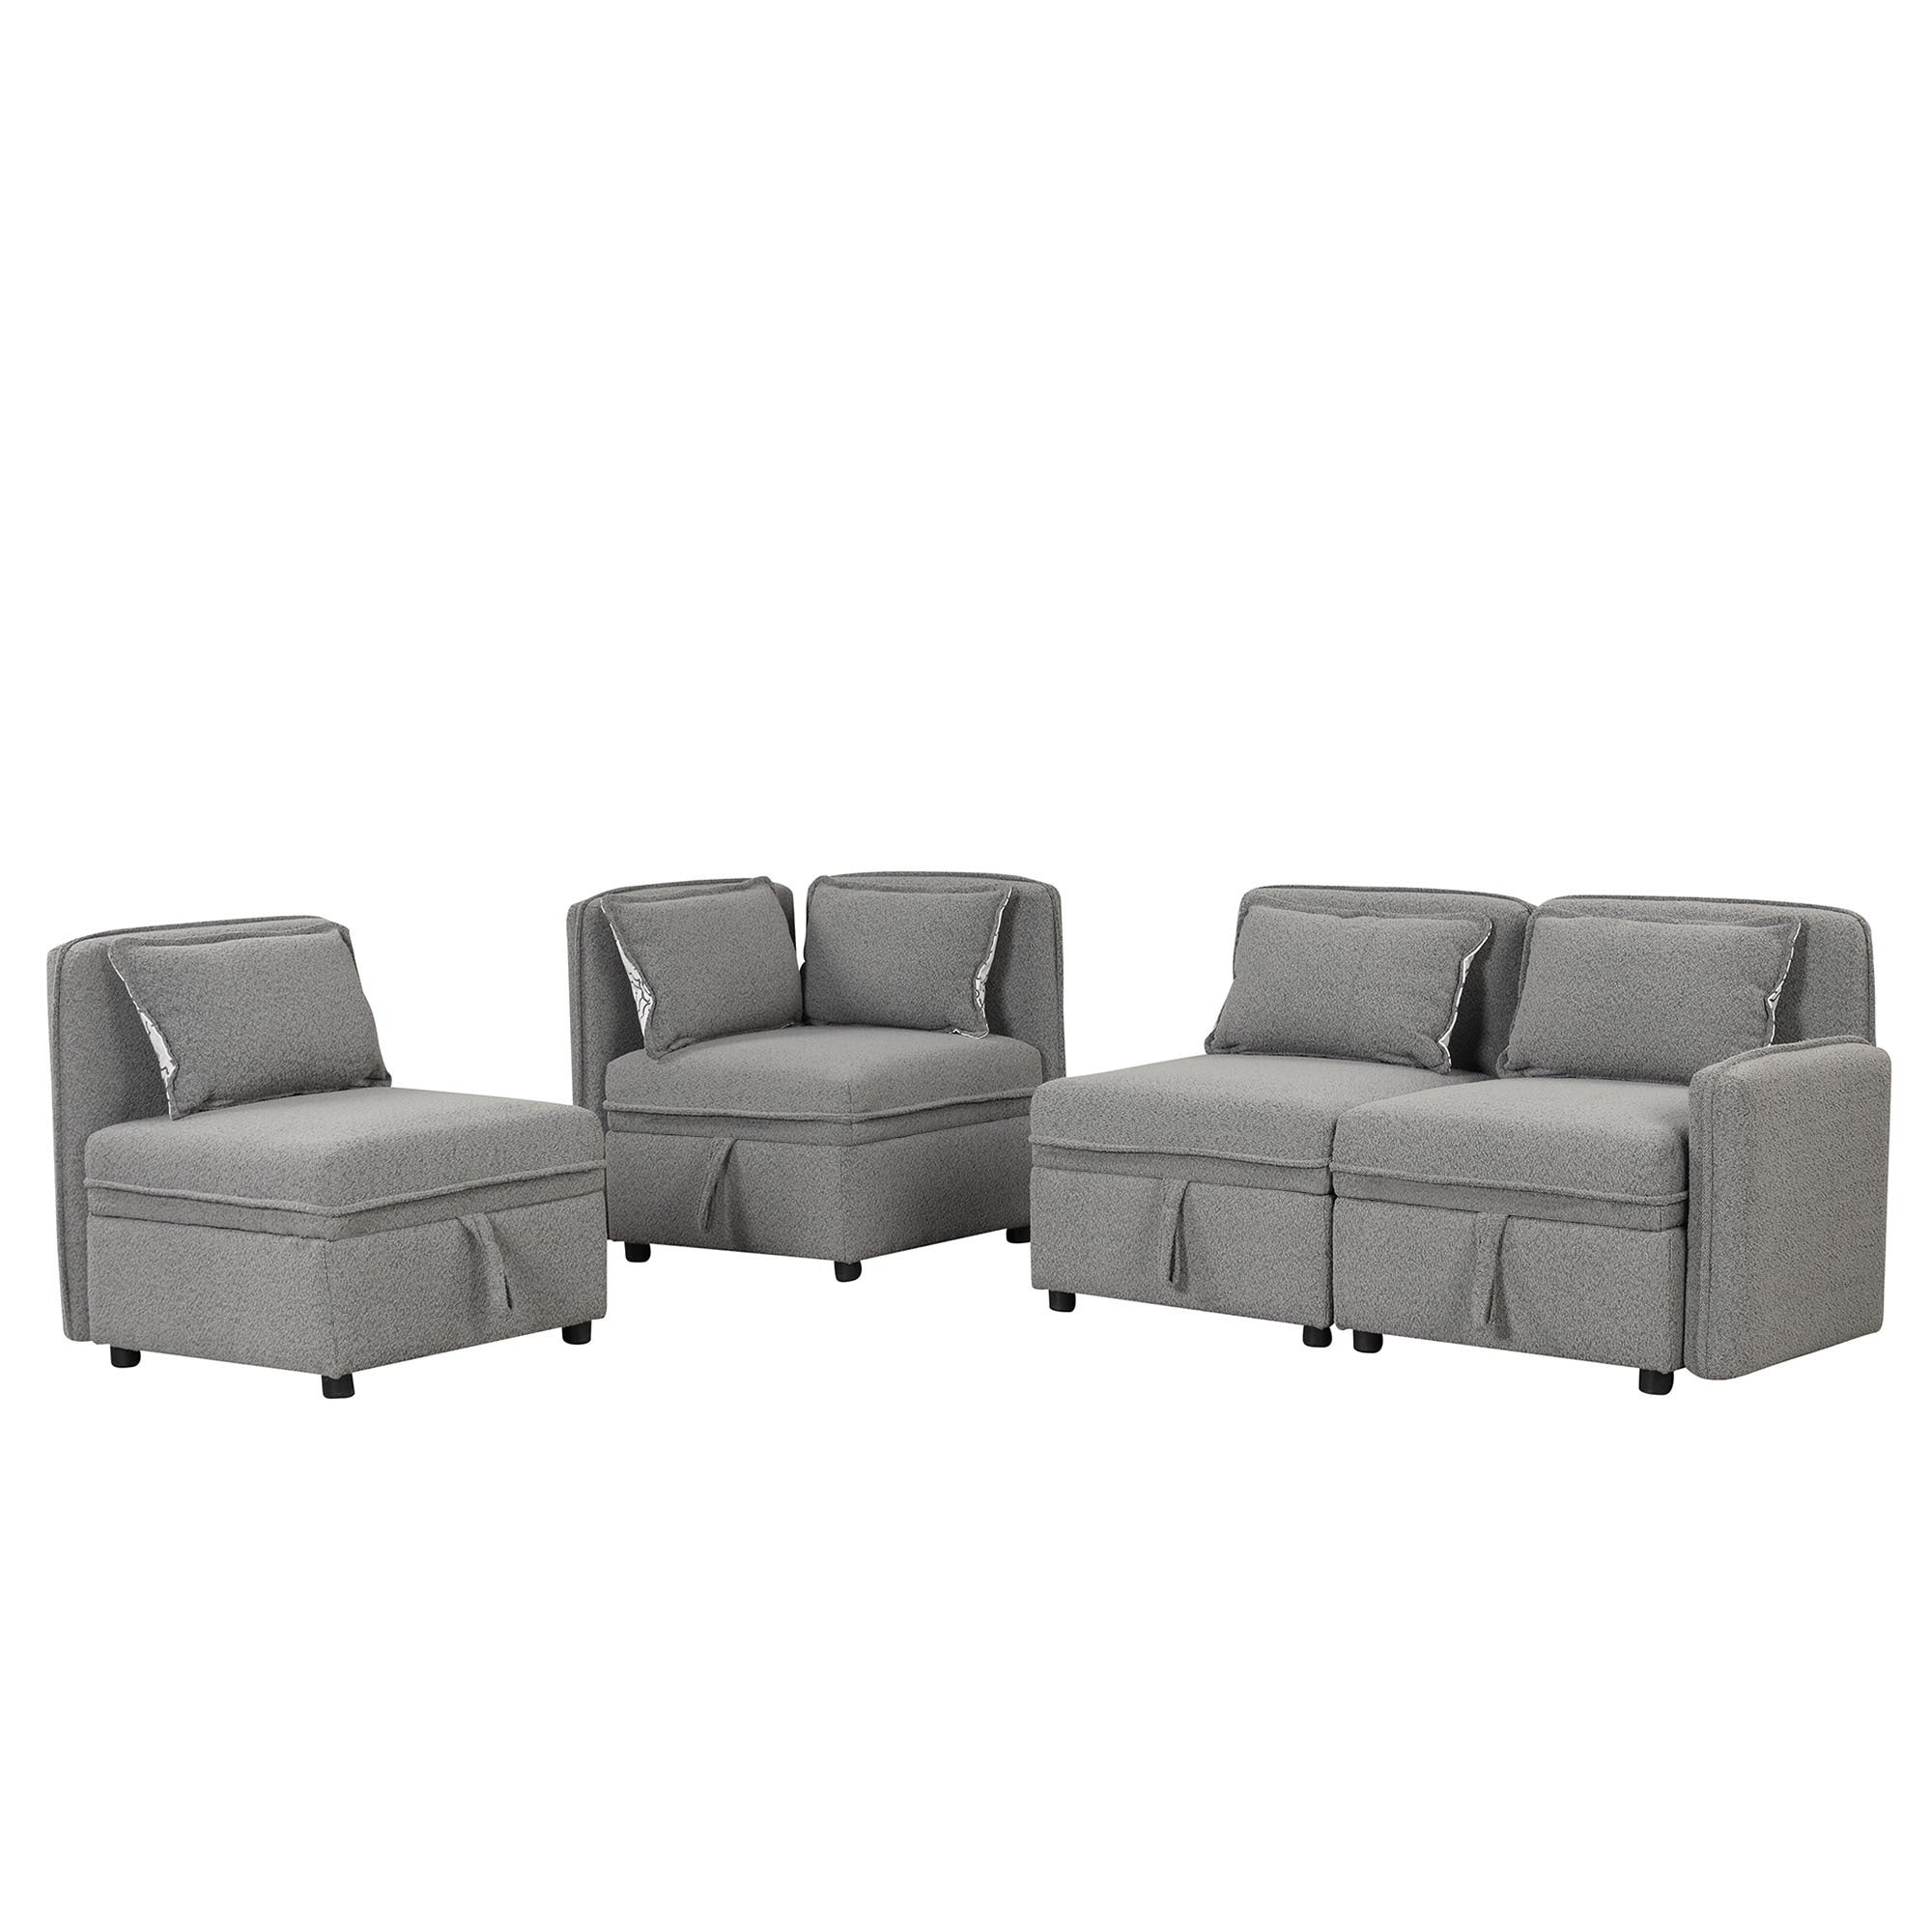 122.8" Convertible Modular Sofa | Chenille Fabric Sectional | 4 Seater with Pillows | Gray-Stationary Sectionals-American Furniture Outlet